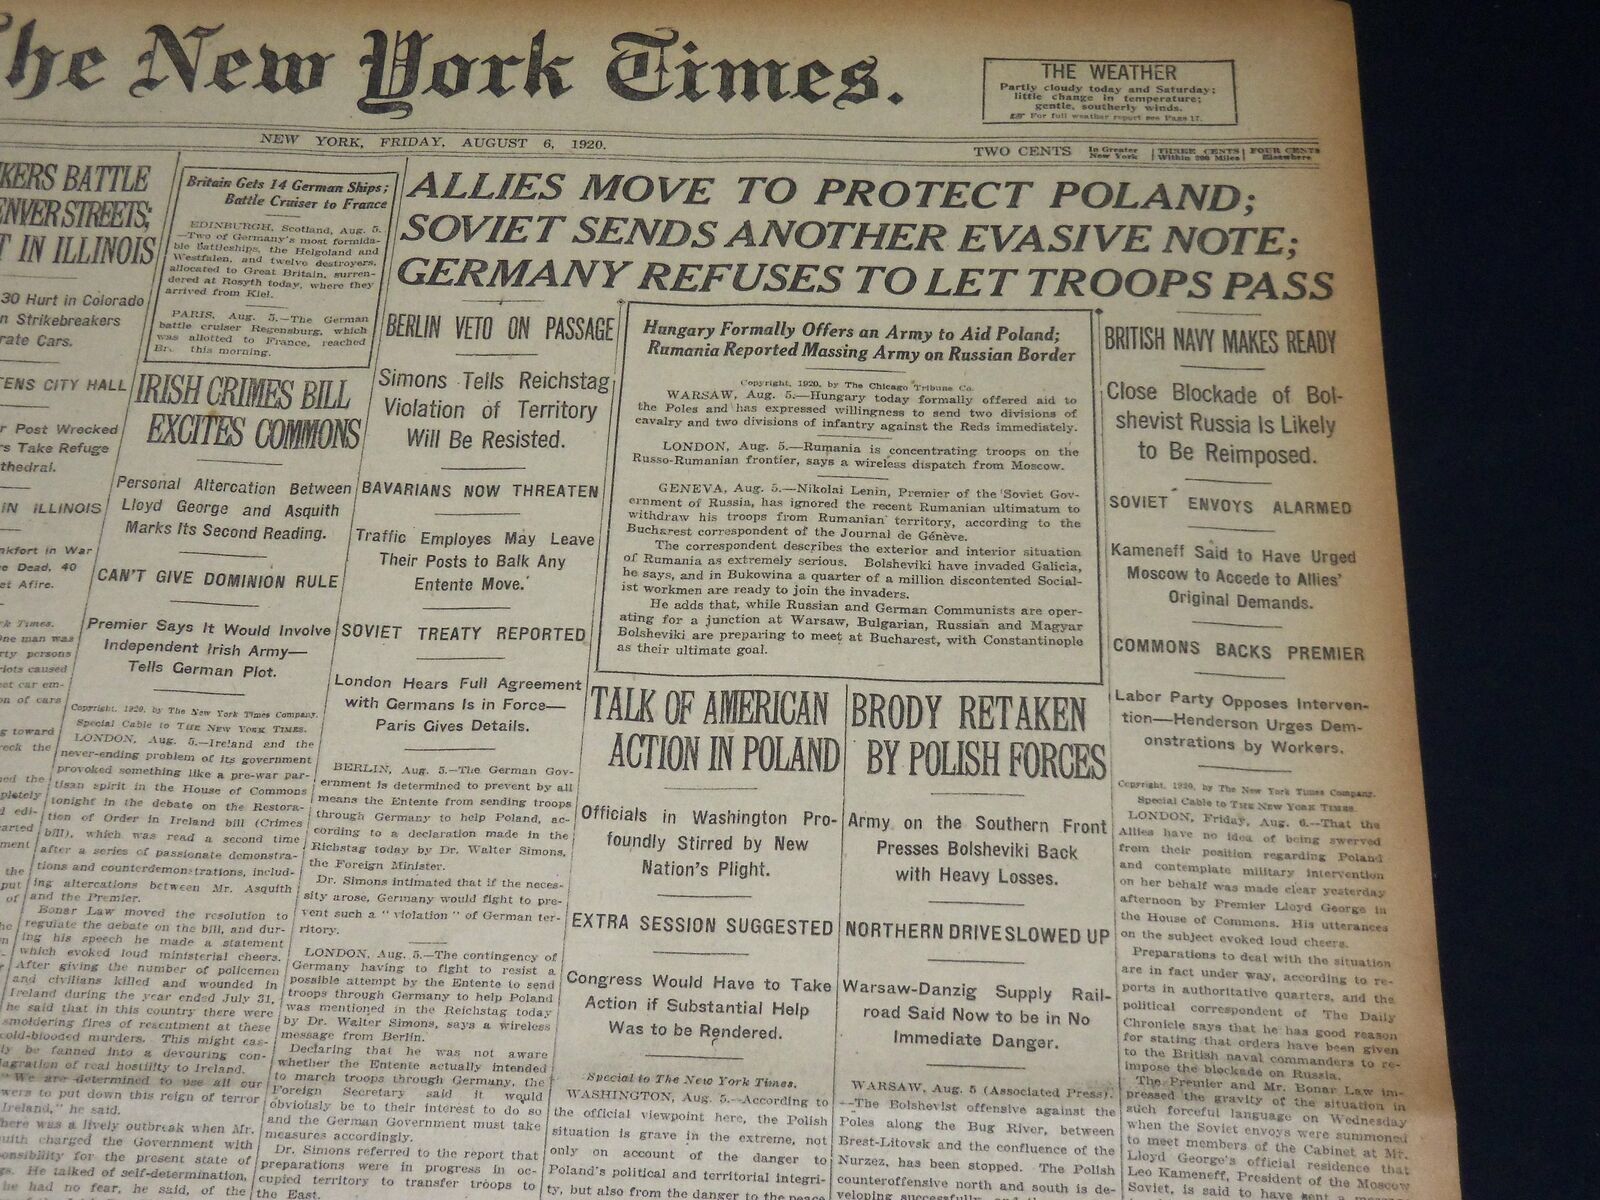 1920 AUGUST 20 NEW YORK TIMES - ALLIES MOVE TO PROTECT POLAND - NT 8543